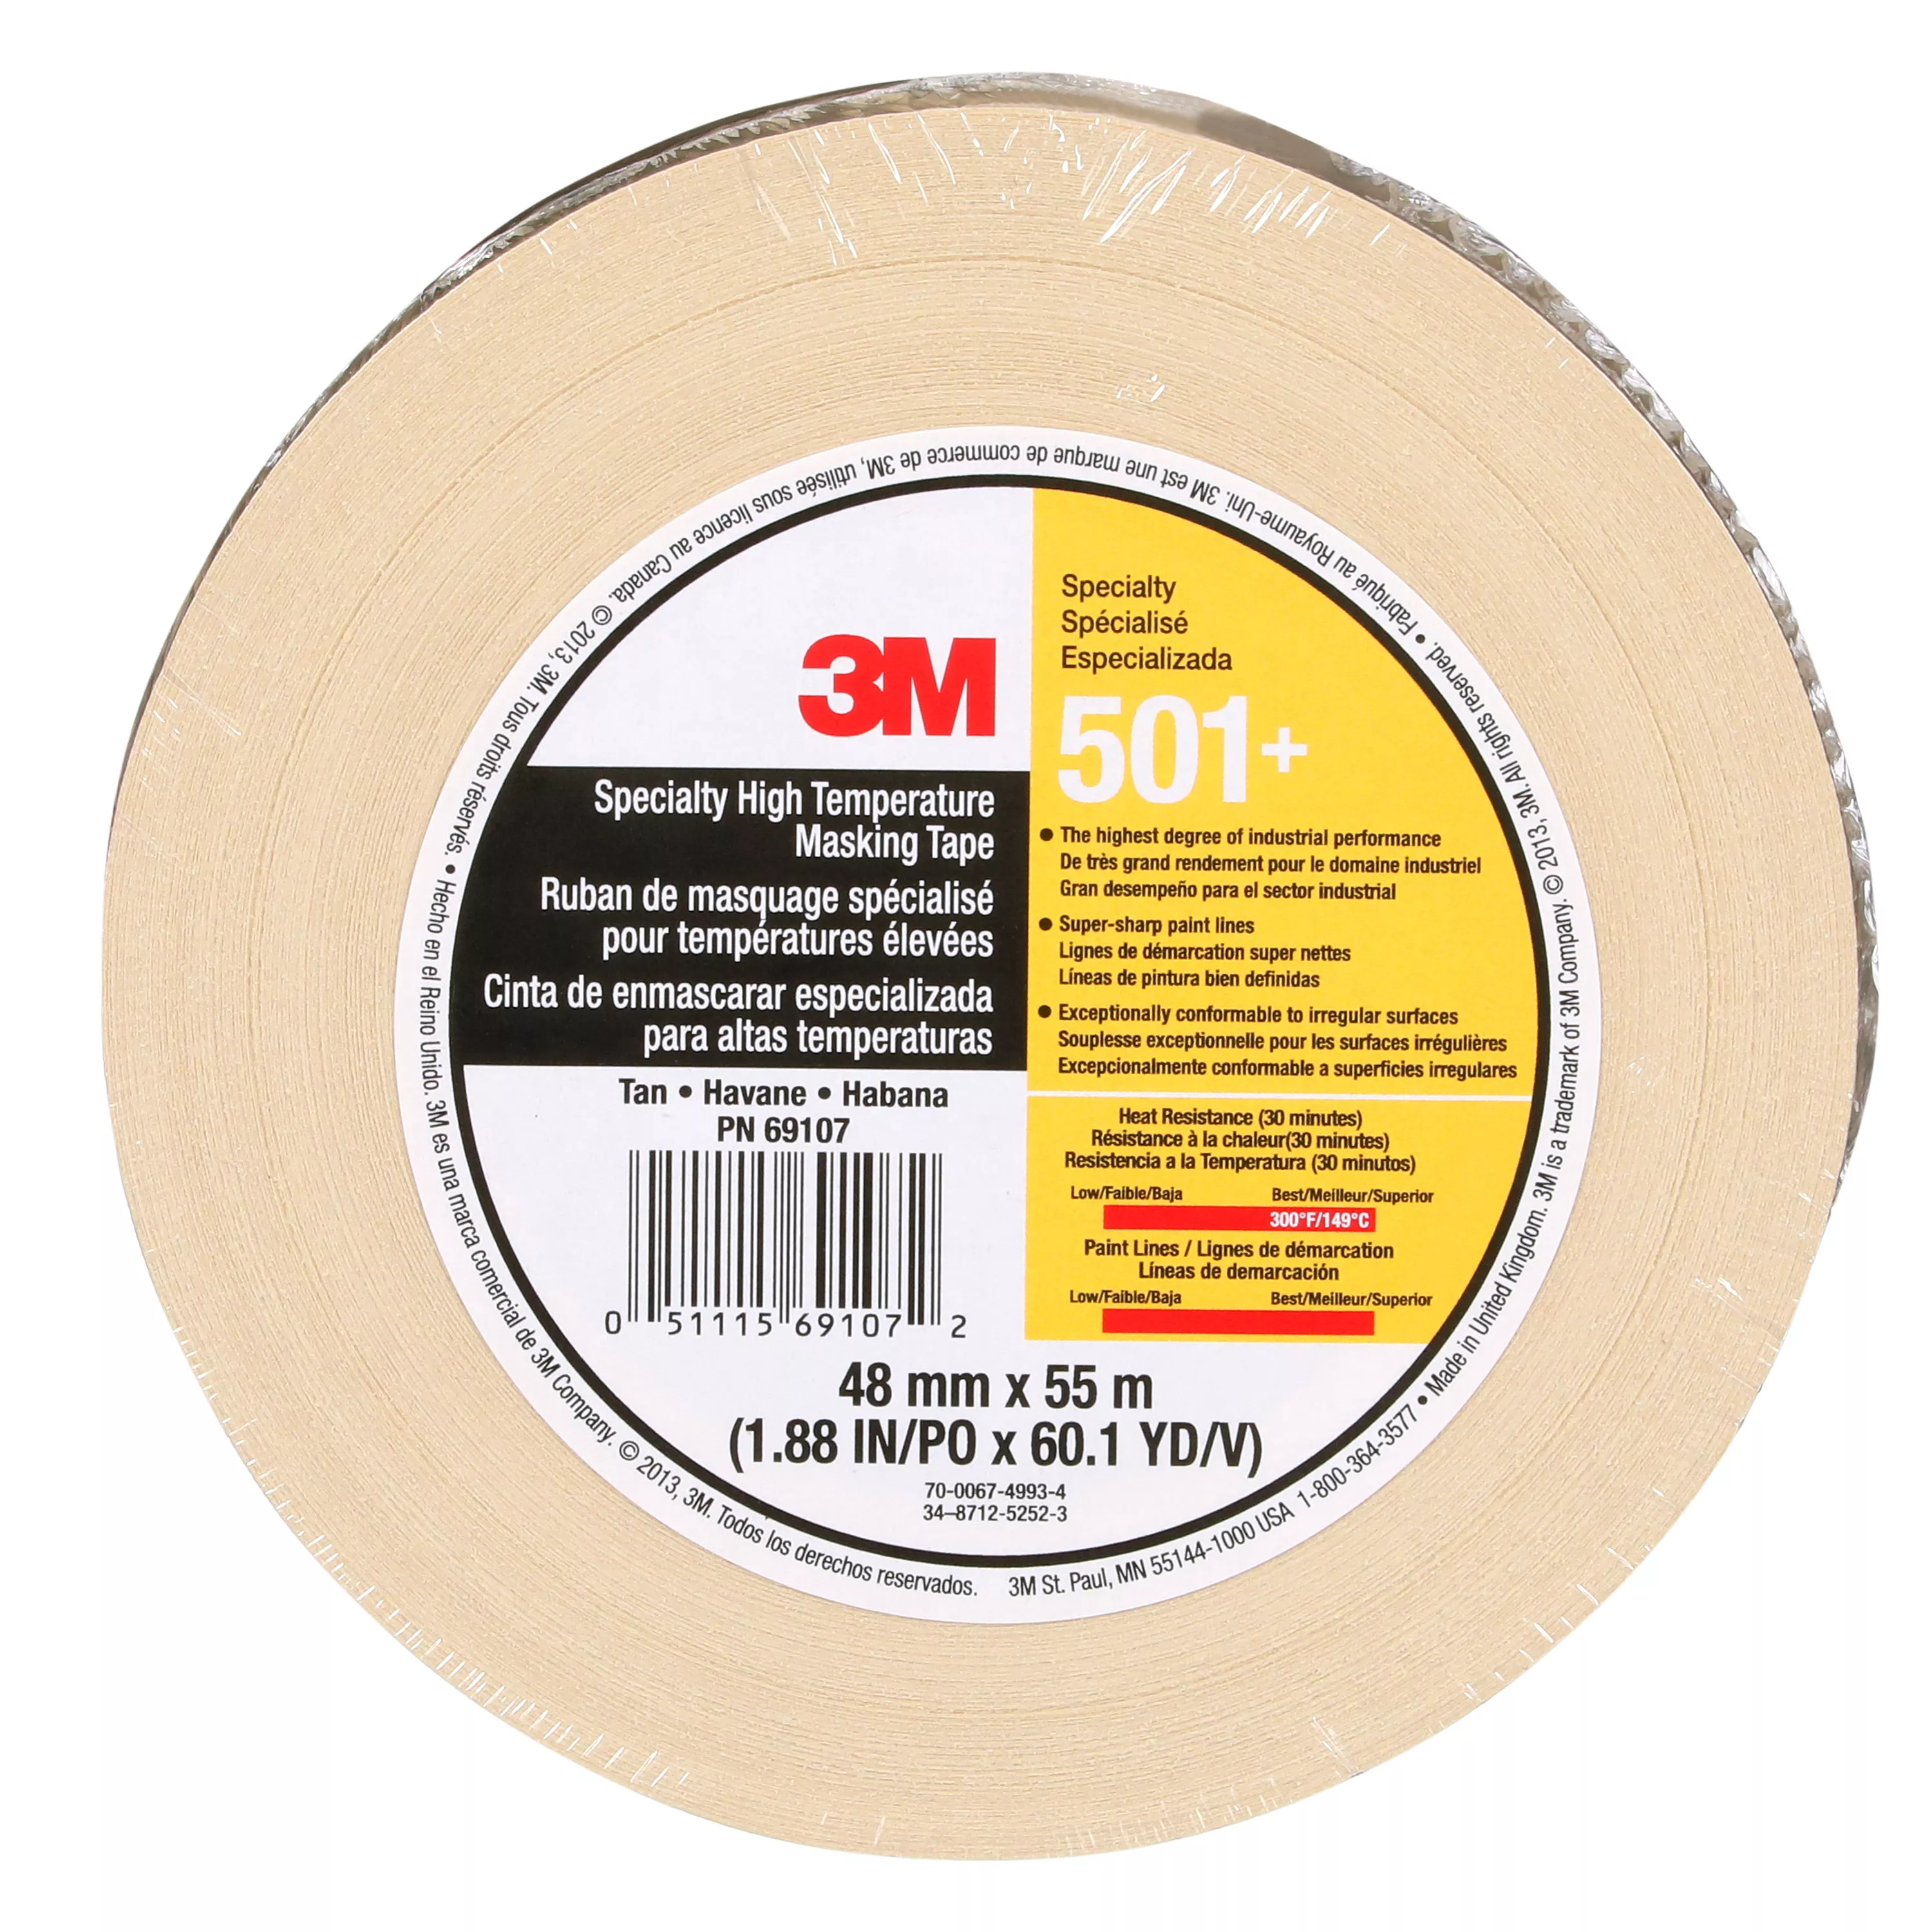 3M™ Specialty High Temperature Masking Tape 501+, Tan, 48 mm x 55 m,
24/Case, Individually Wrapped Conveniently Packaged